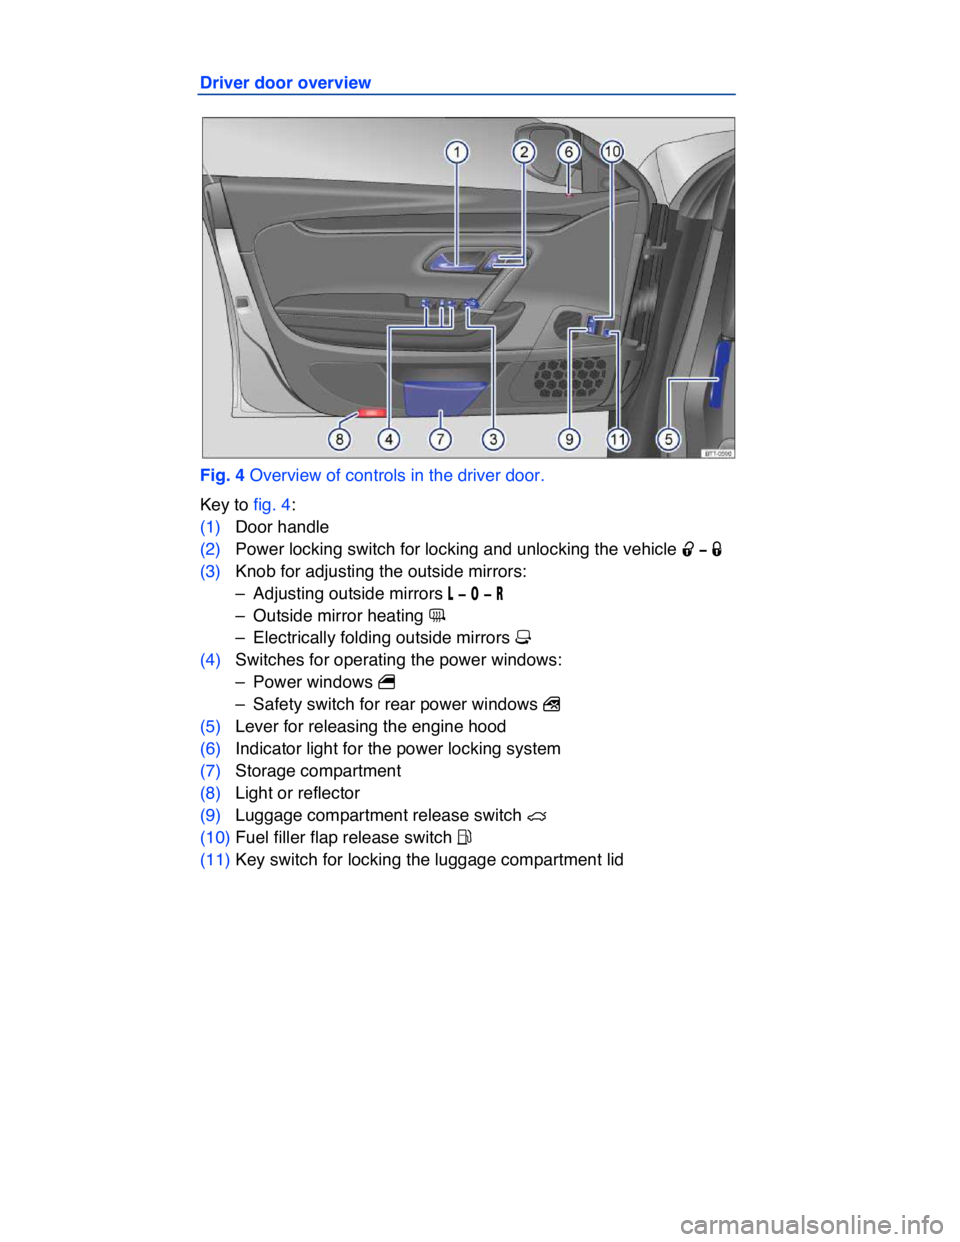 VOLKSWAGEN CC 2016  Owners Manual  
Driver door overview 
 
Fig. 4 Overview of controls in the driver door. 
Key to fig. 4: 
(1) Door handle  
(2) Power locking switch for locking and unlocking the vehicle �0 �